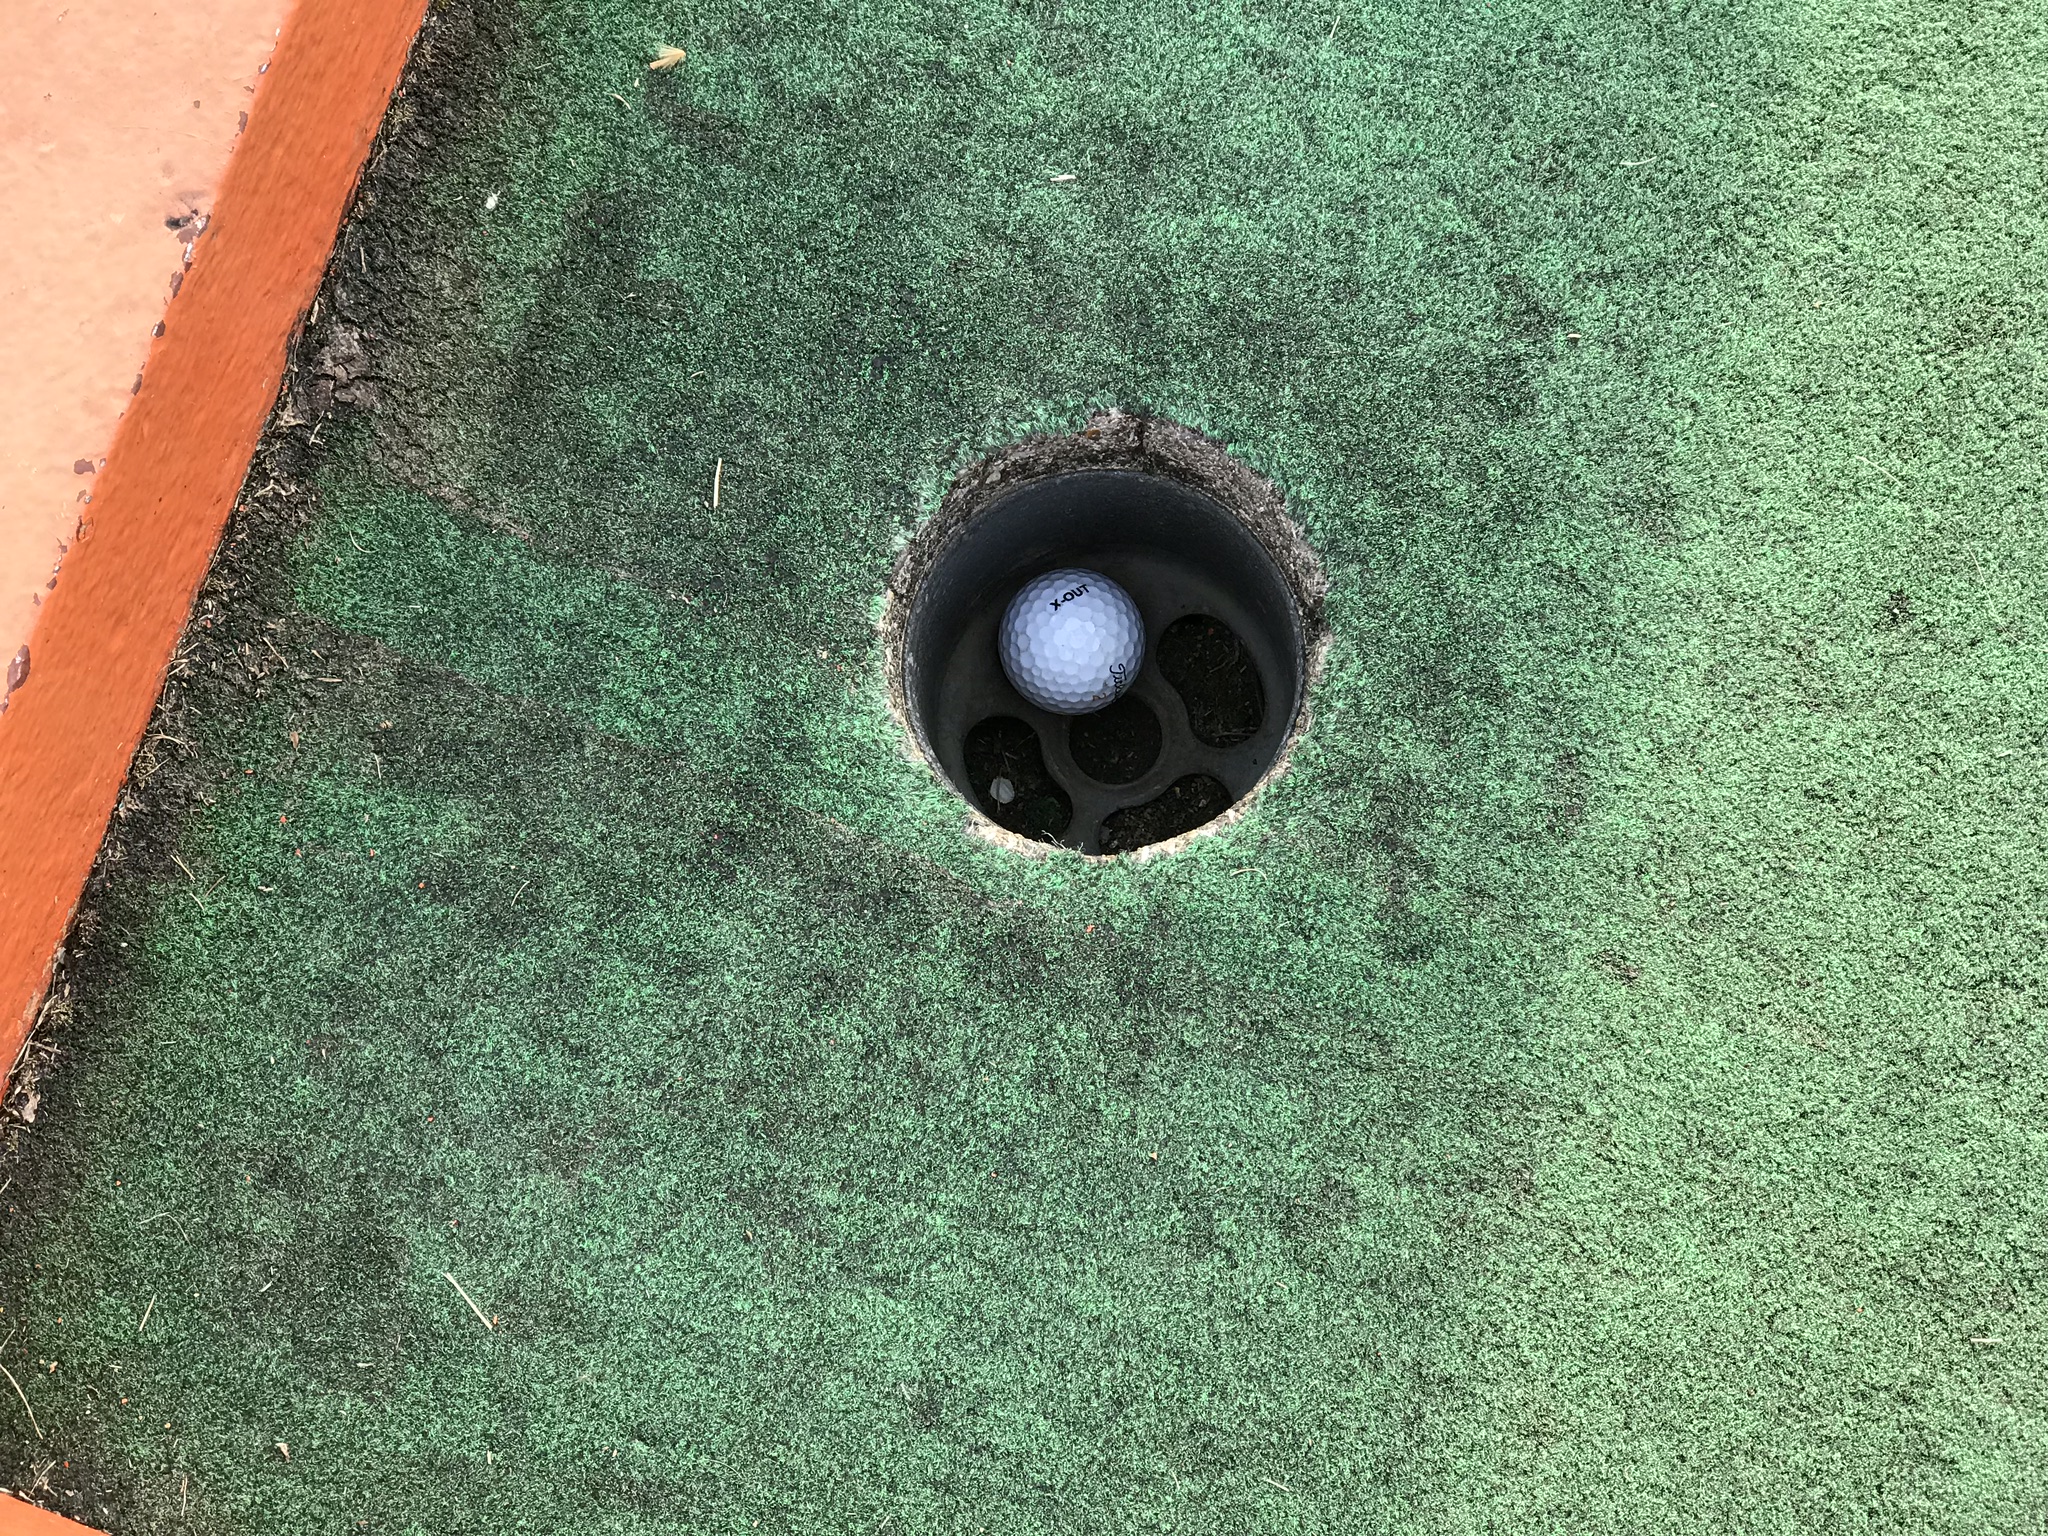 A golf ball in the hole on course one.  Photo taken by and the property of FourWalls.